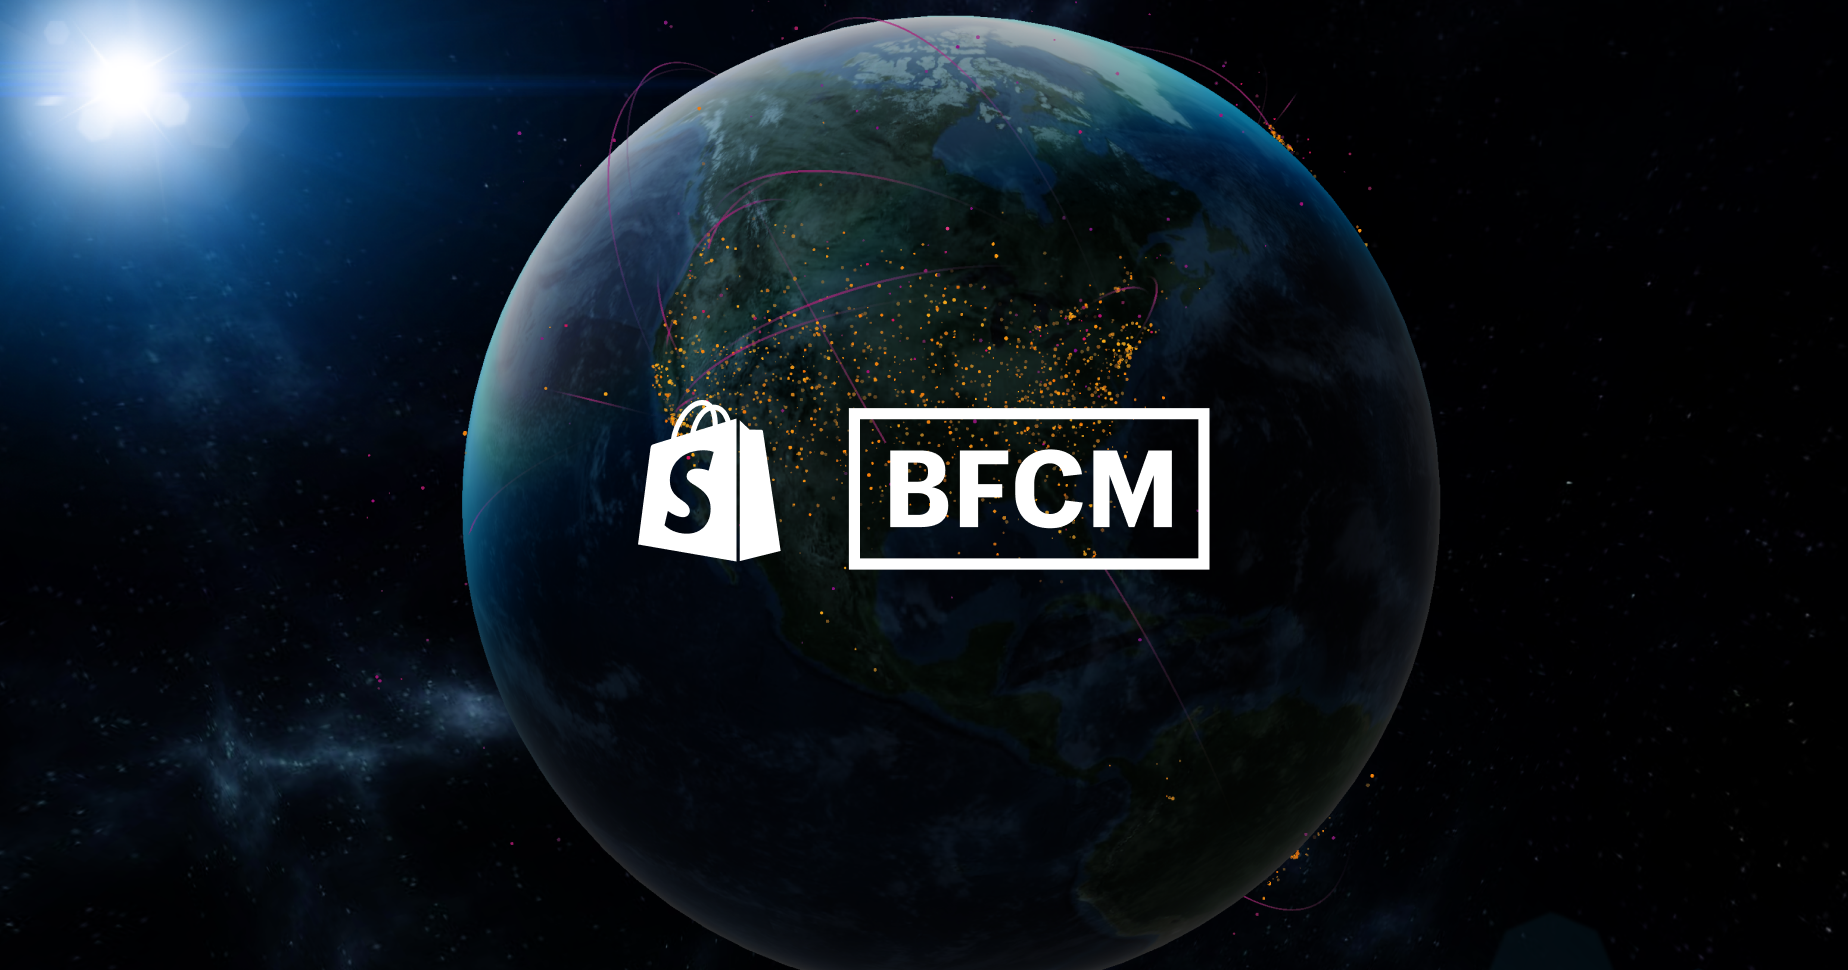 Shopify's Live Map for BFCM